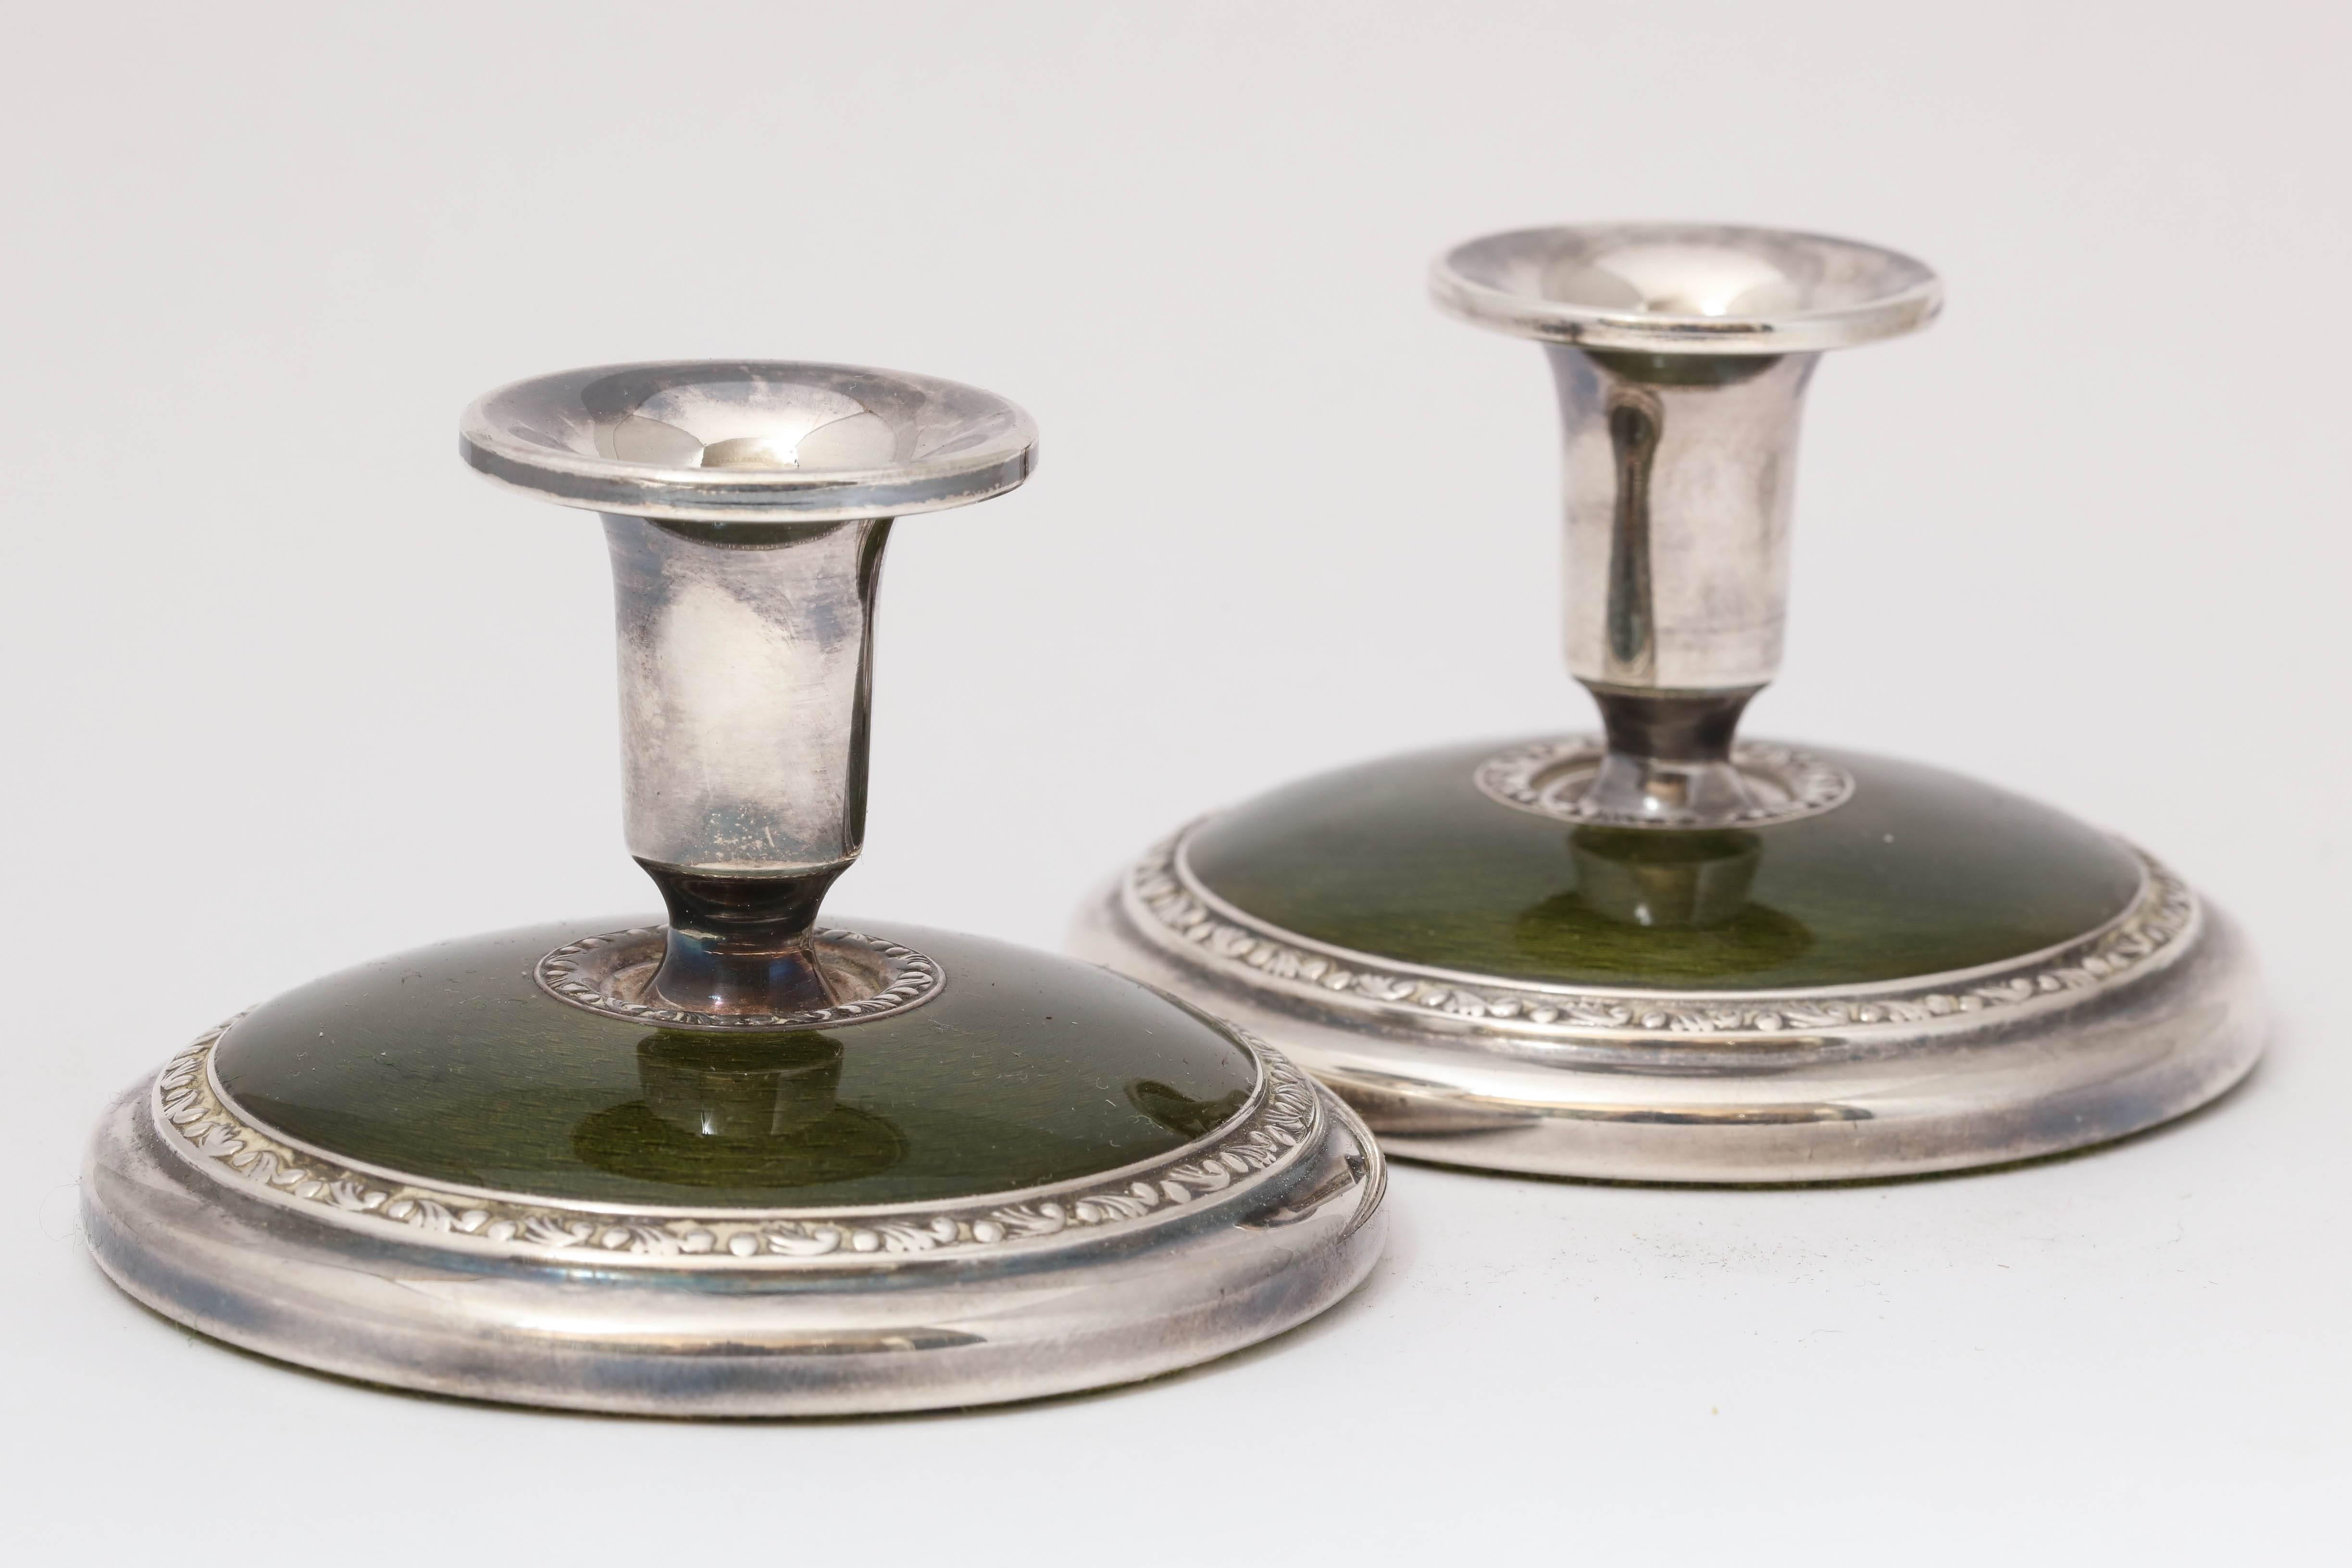 Pair of Art Deco, sterling silver and deep, olive green candlesticks, Norway, circa 1930s, Norsk Solwaaren Industri, makers. Measures: 2 inches high x 3 inches diameter (across base). Weighted. Dark spots are reflections. Excellent condition.